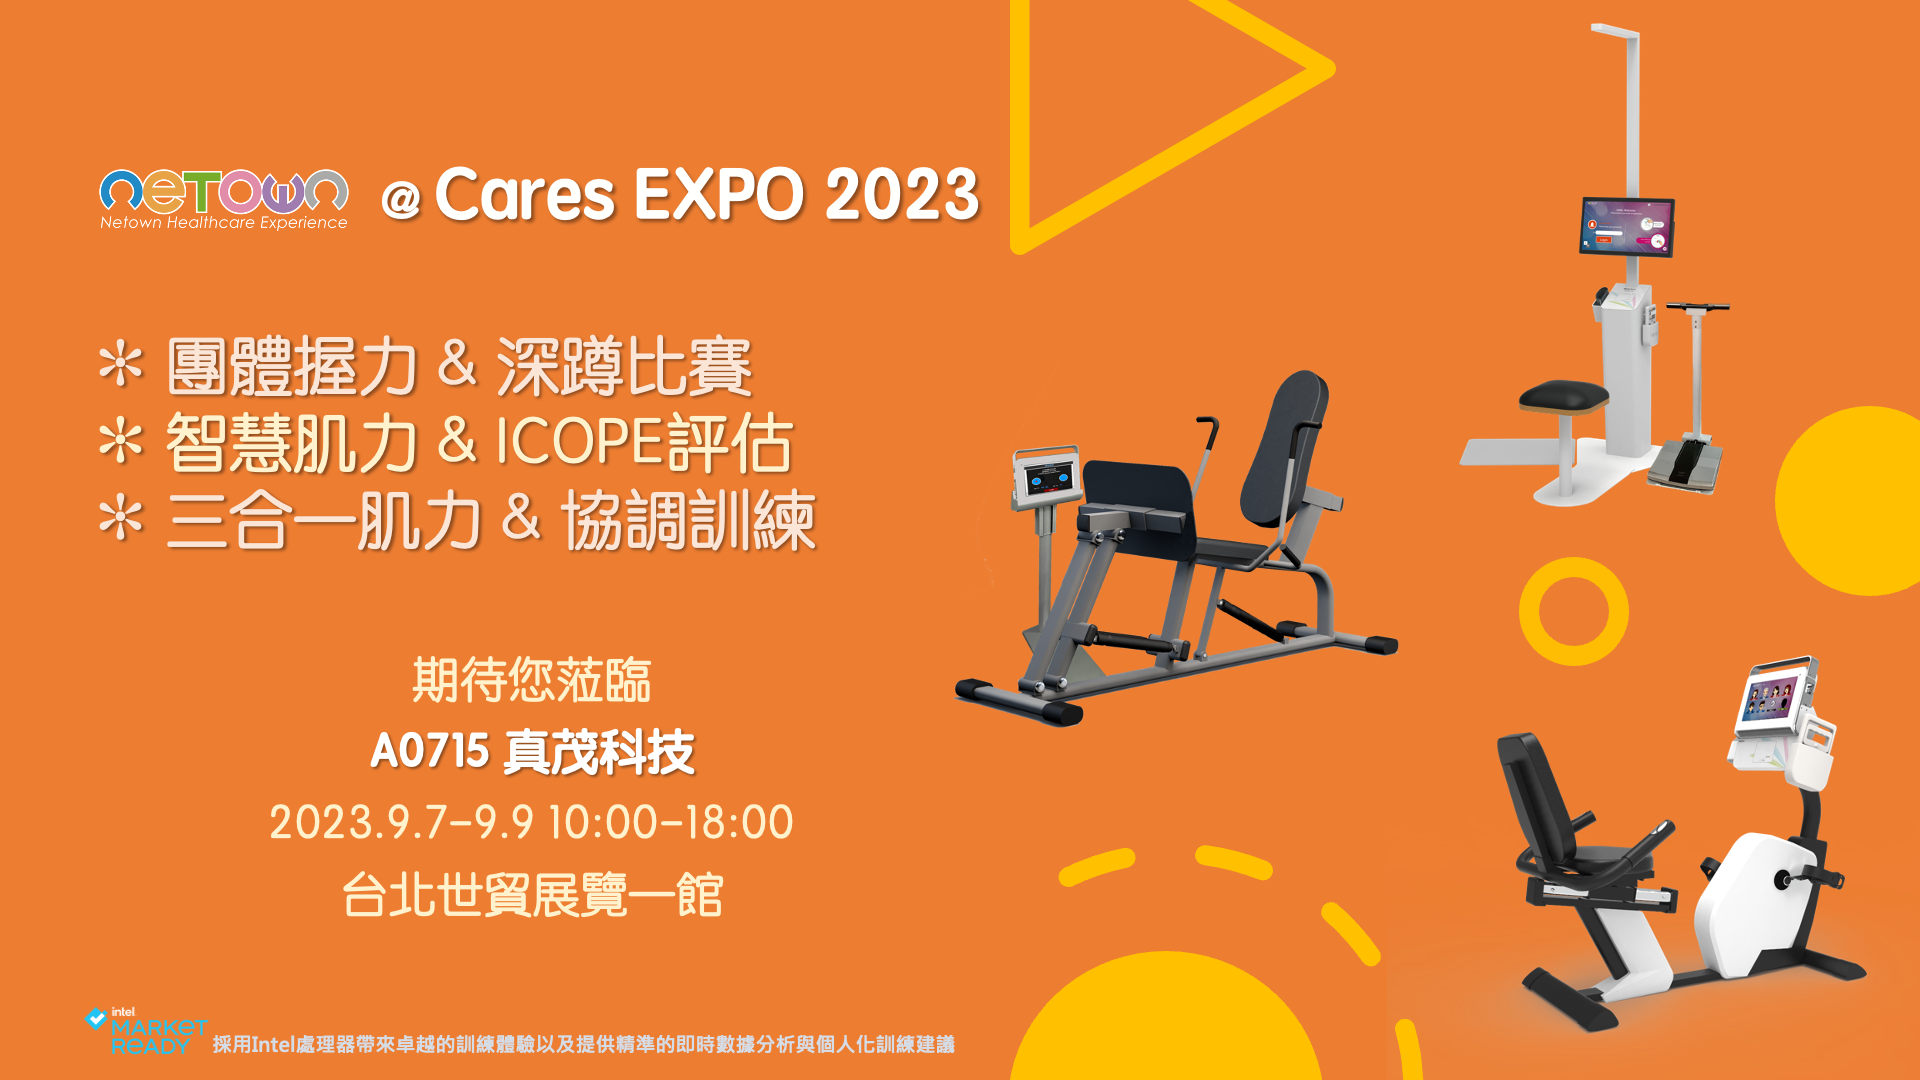 Cares EXPO 2023